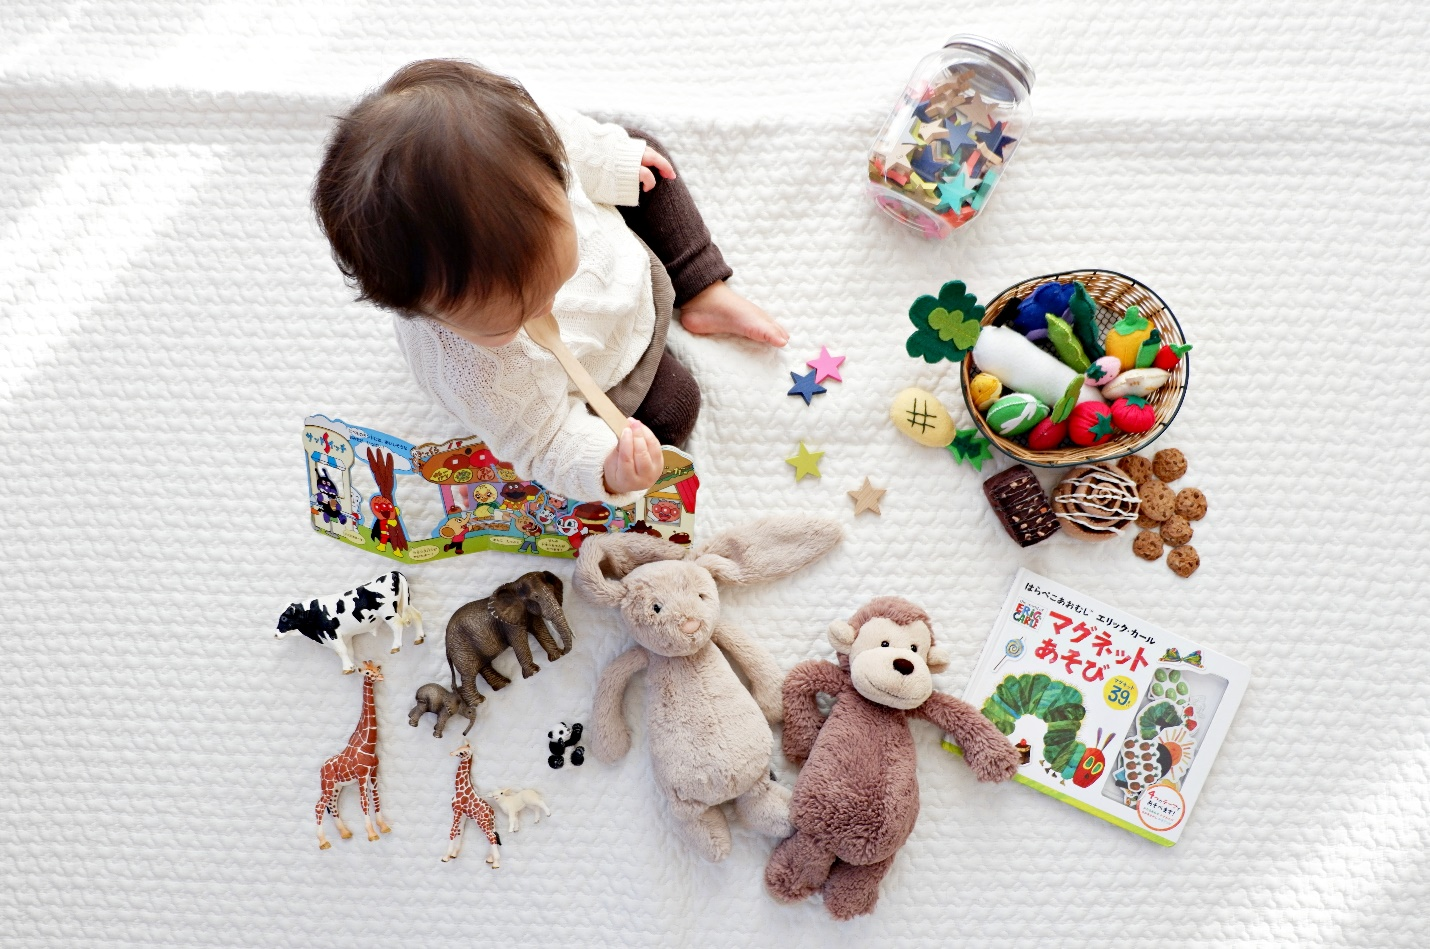 baby surrounded by a variety of toys